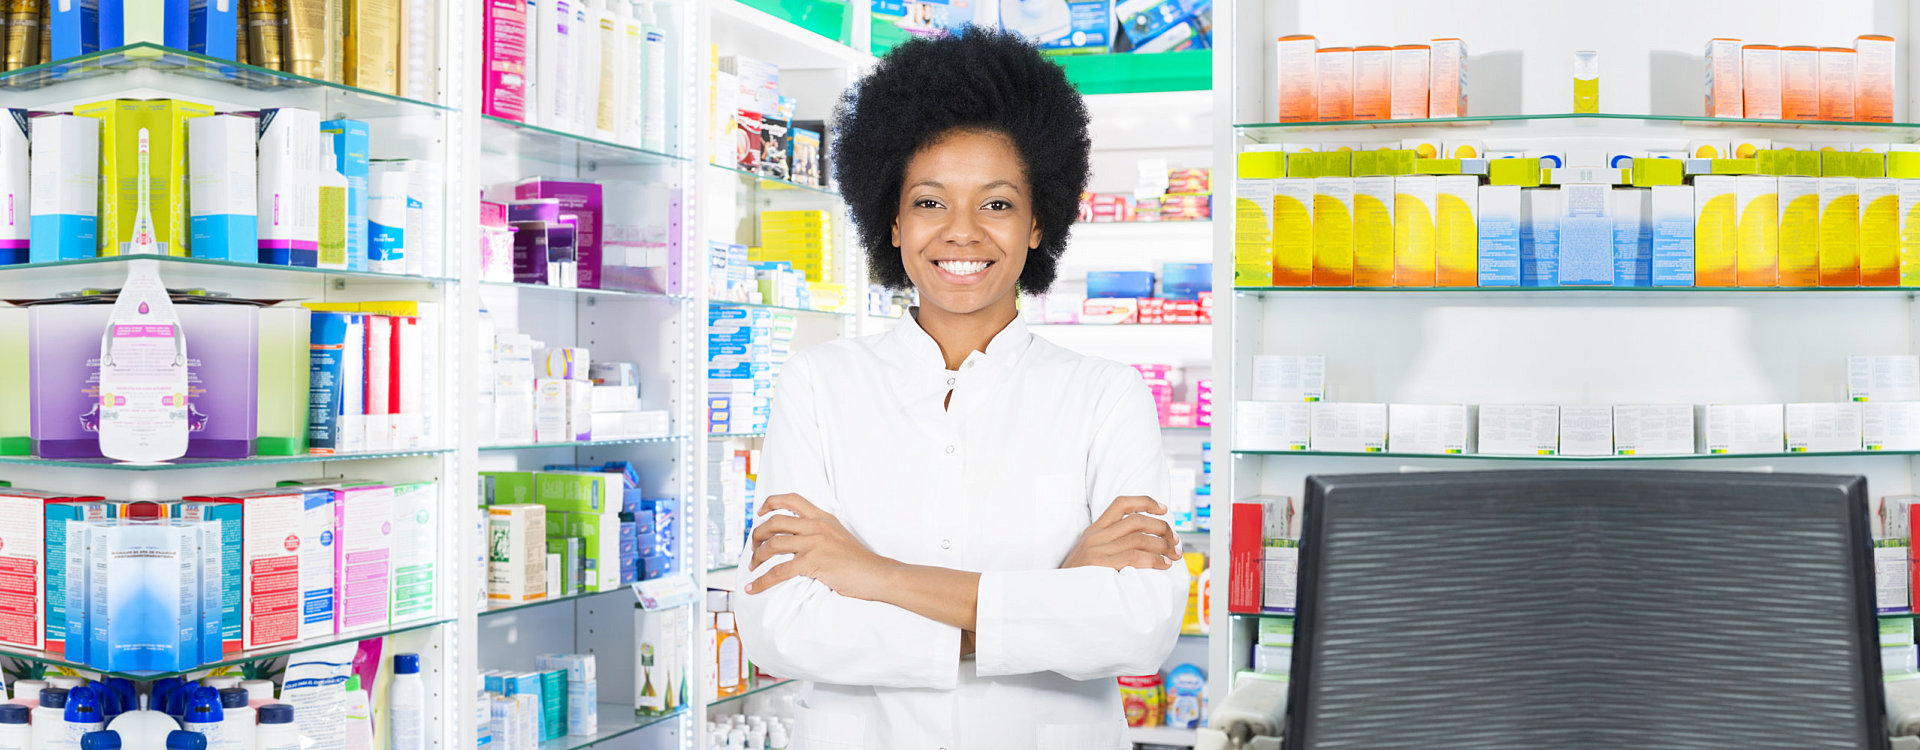 pharmacist crossing her arms with a big smile